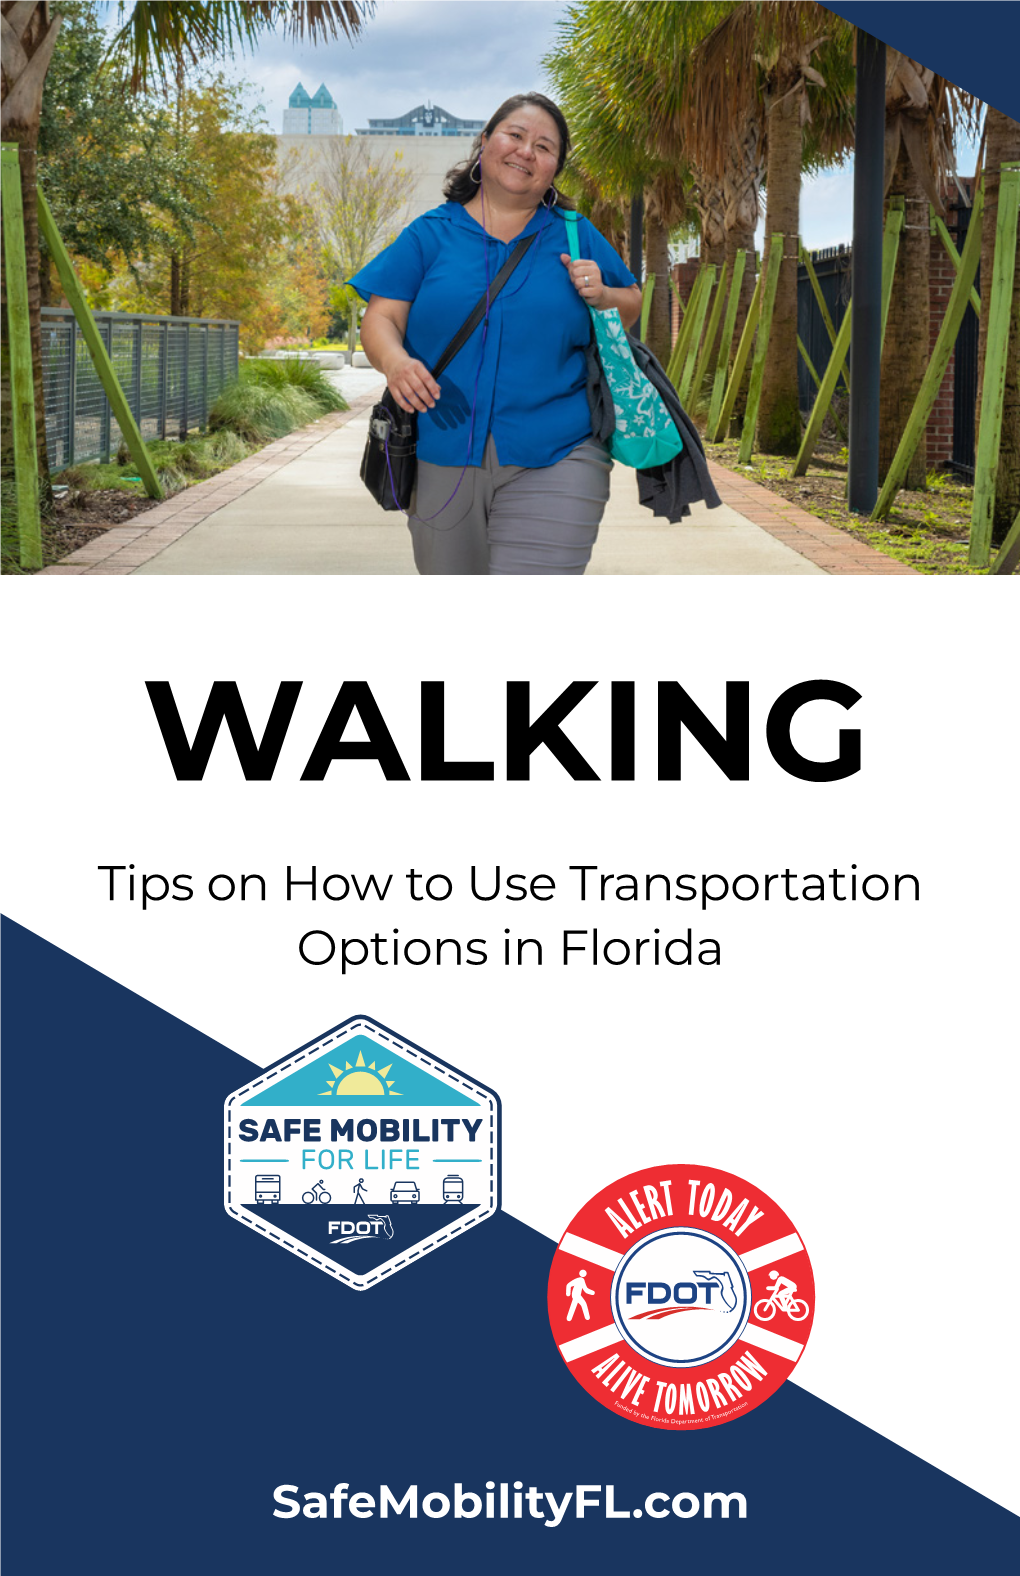 Walking: Tips on How to Use Transportation Options in Florida